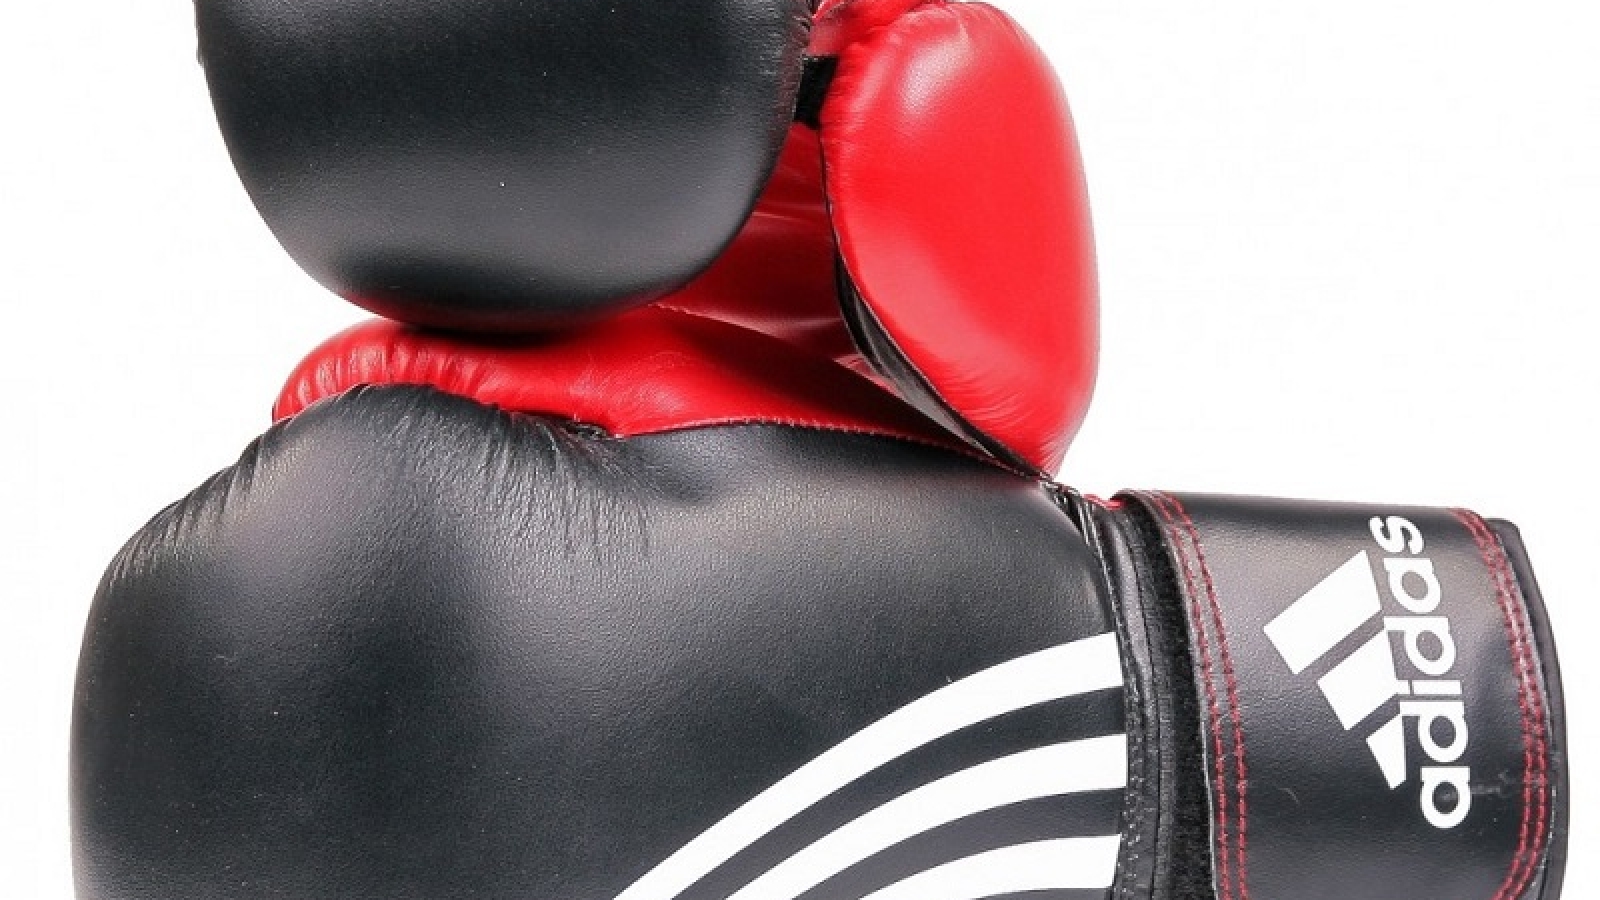 How to choose boxing gloves